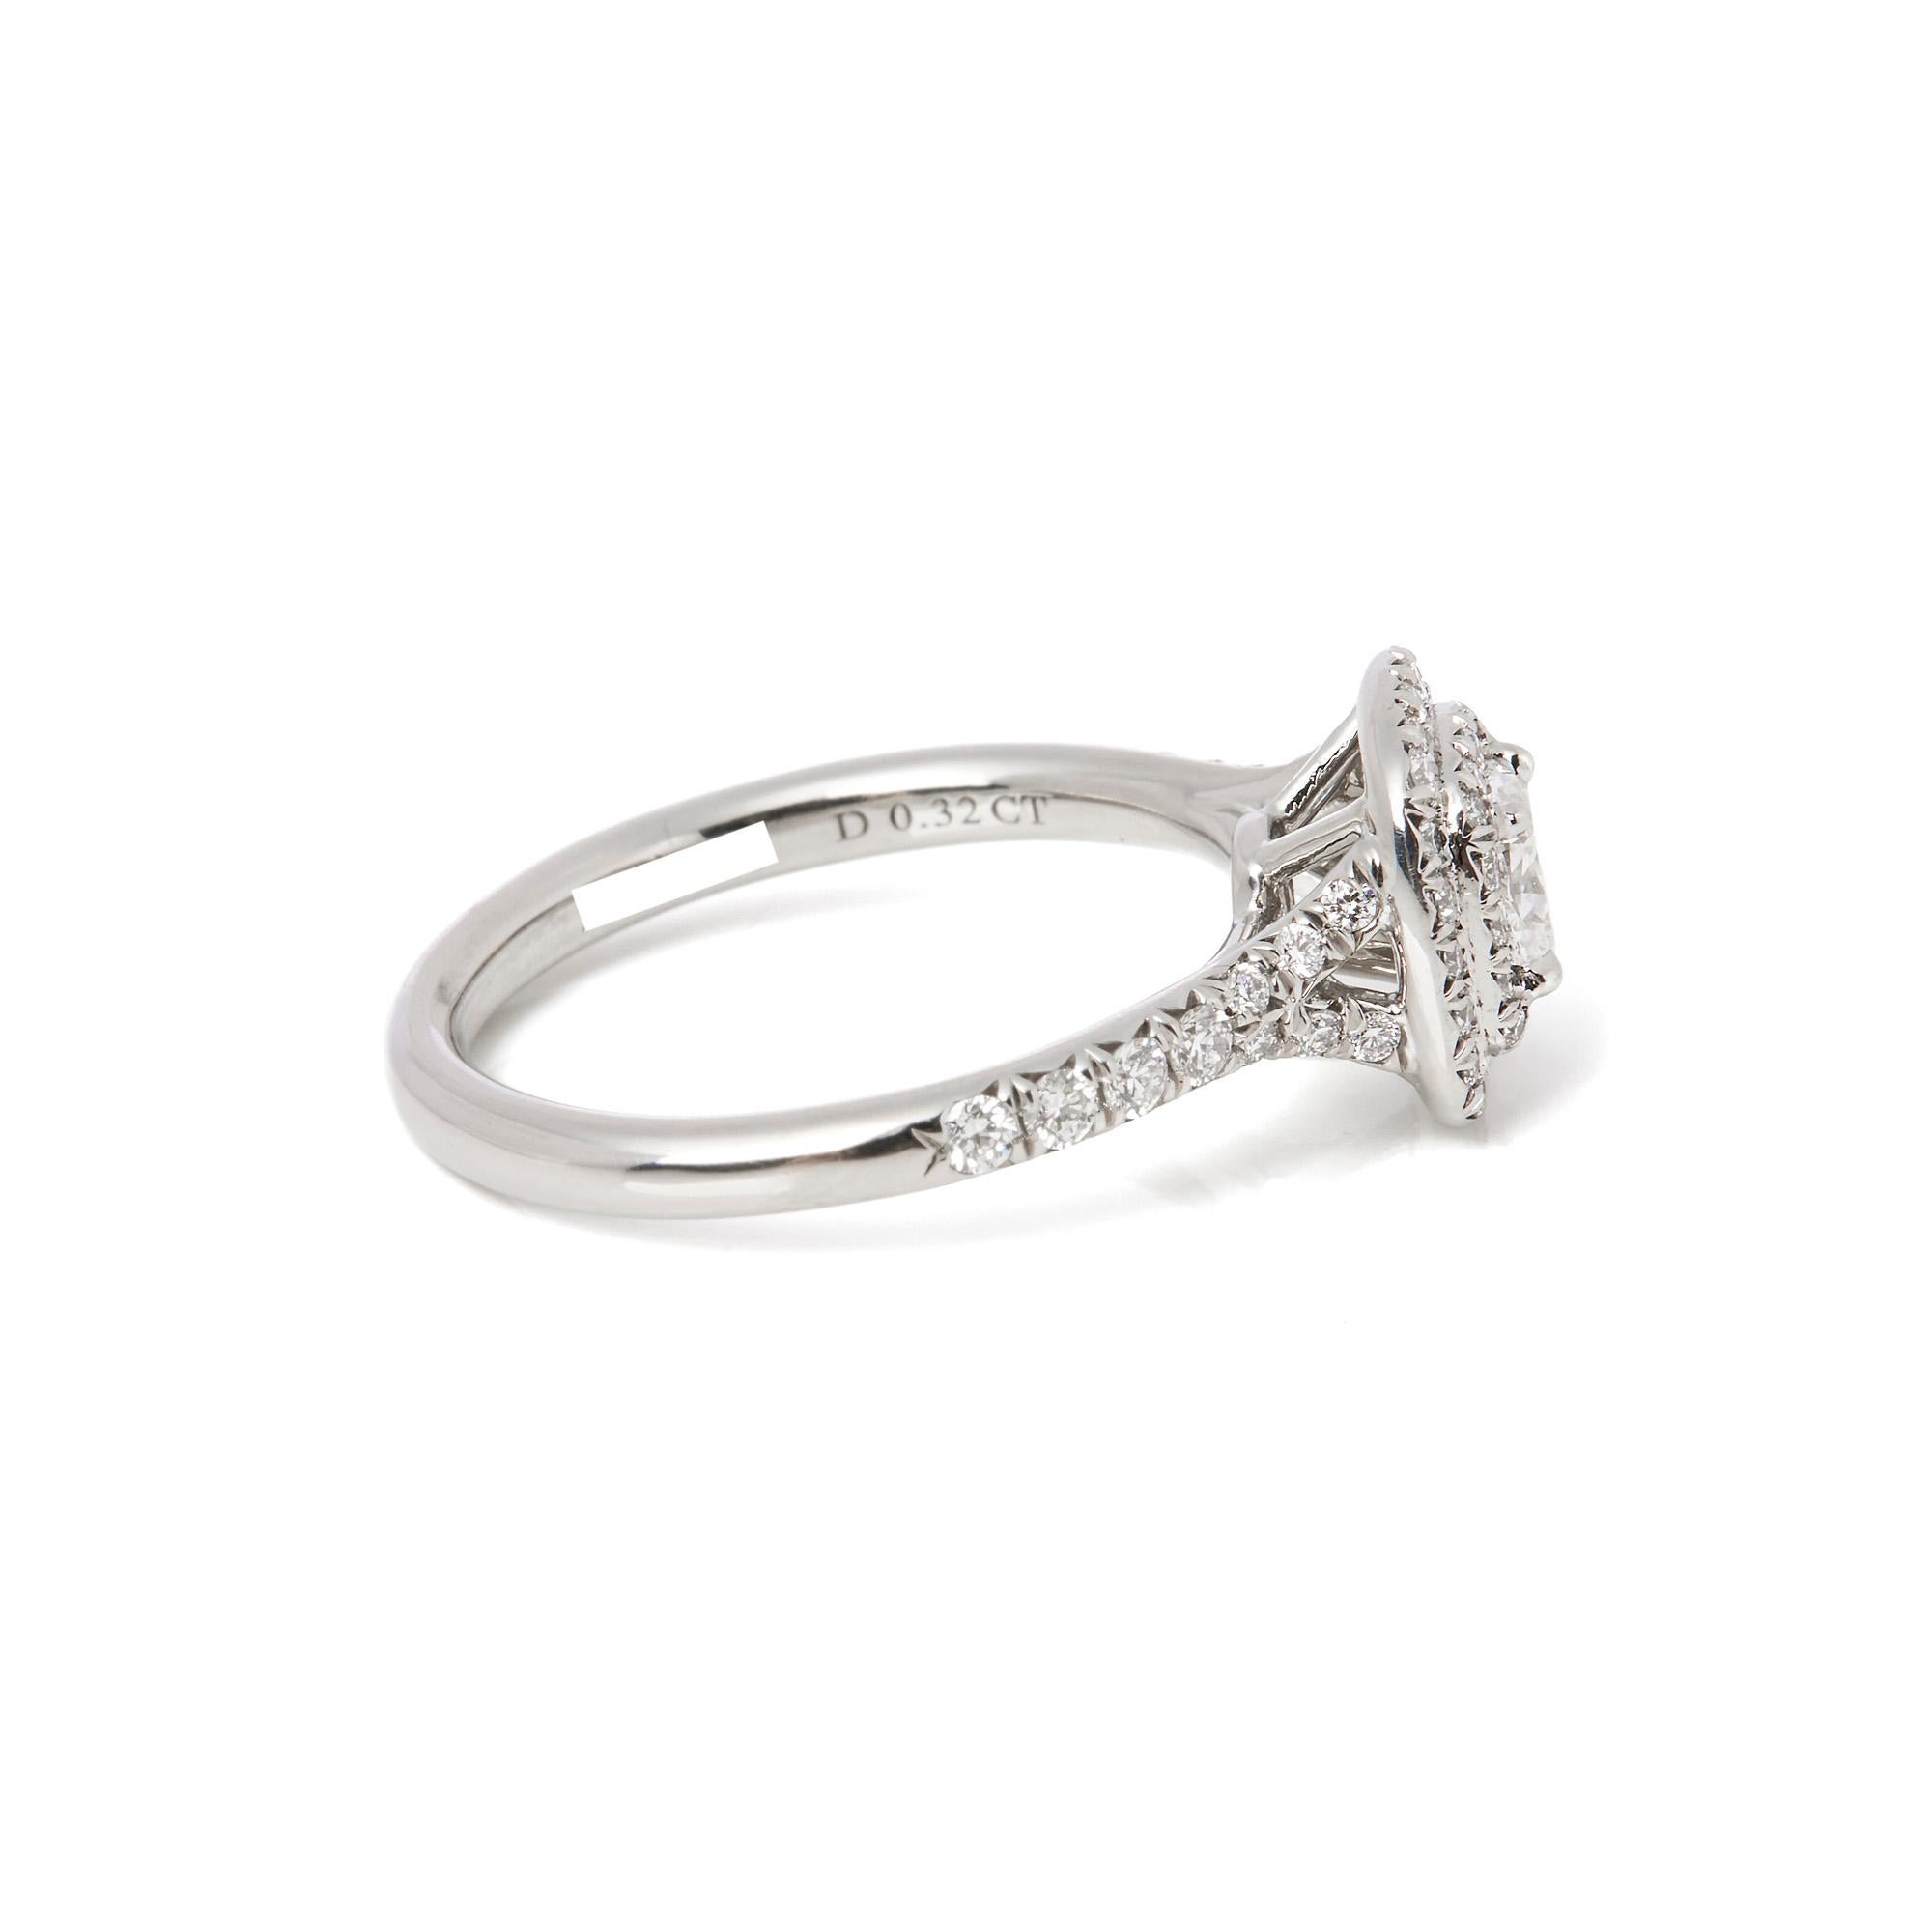 This engagement ring by Tiffany & Co is from their Soleste collection and features 1 cushion cut diamond totalling 0.32ct surrounded by a double halo of round brilliant diamonds with further diamonds on the shoulders of the ring. It is accompanied